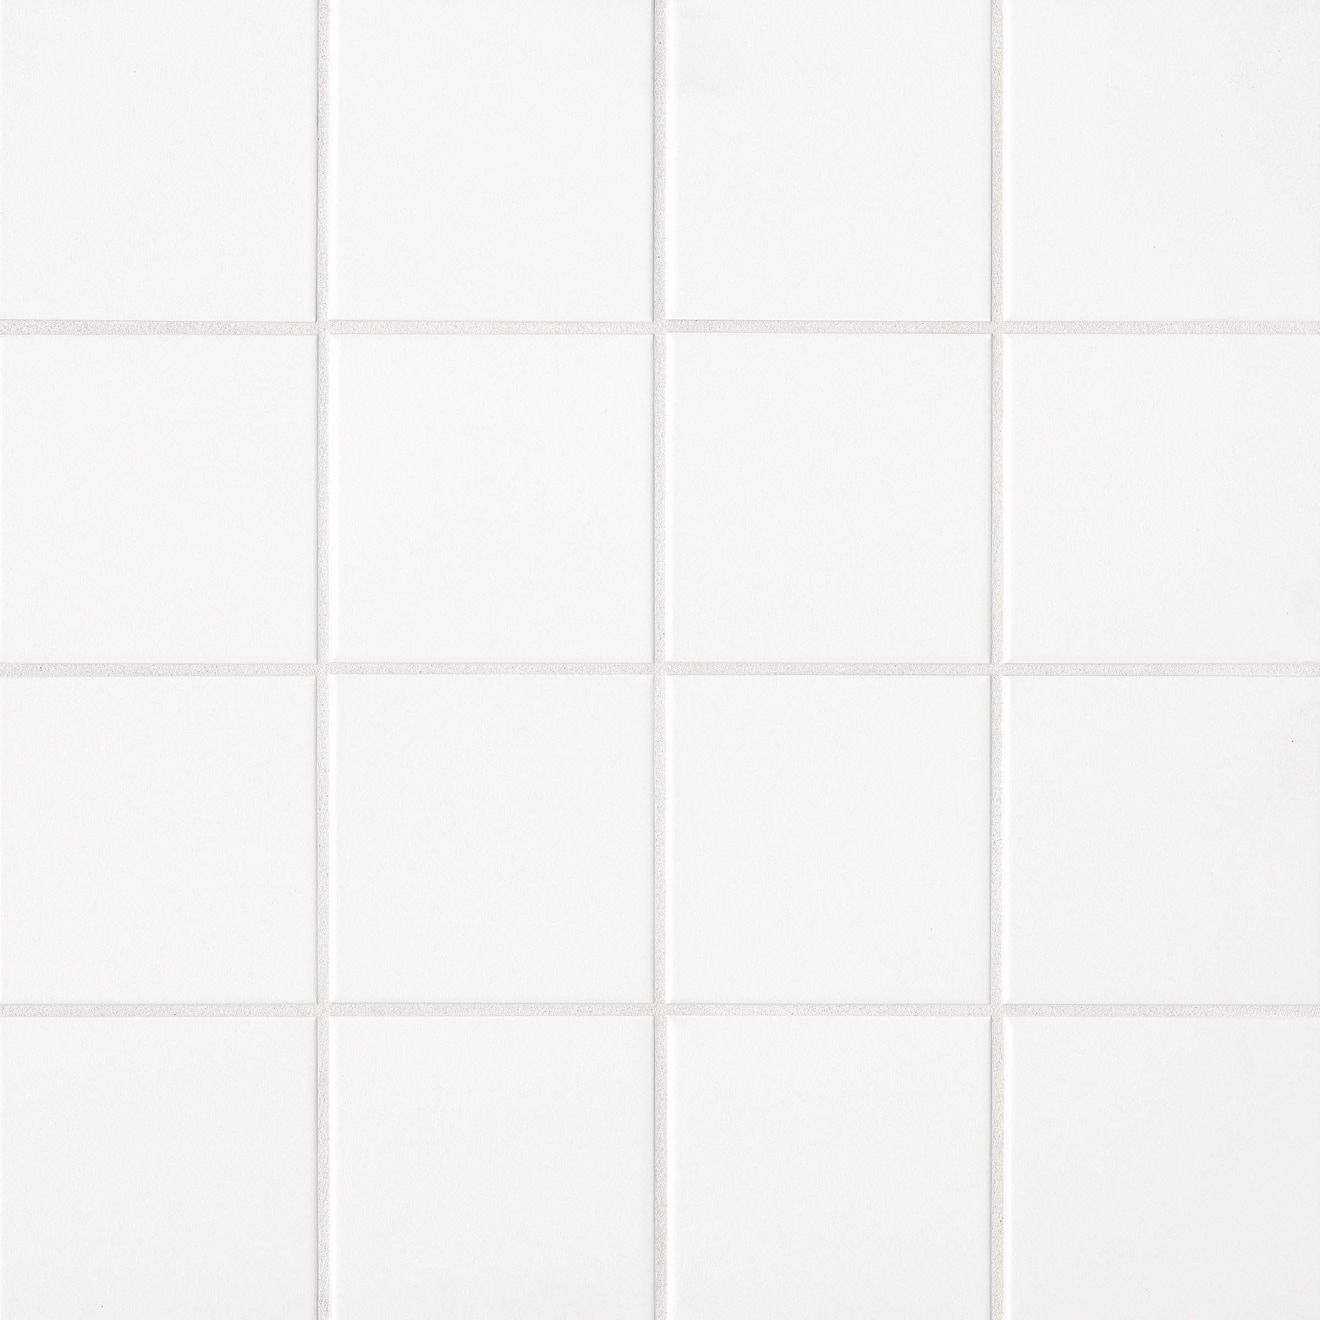 Traditions 6" x 6" Wall Tile in Ice White | Bedrosians Tile & Stone